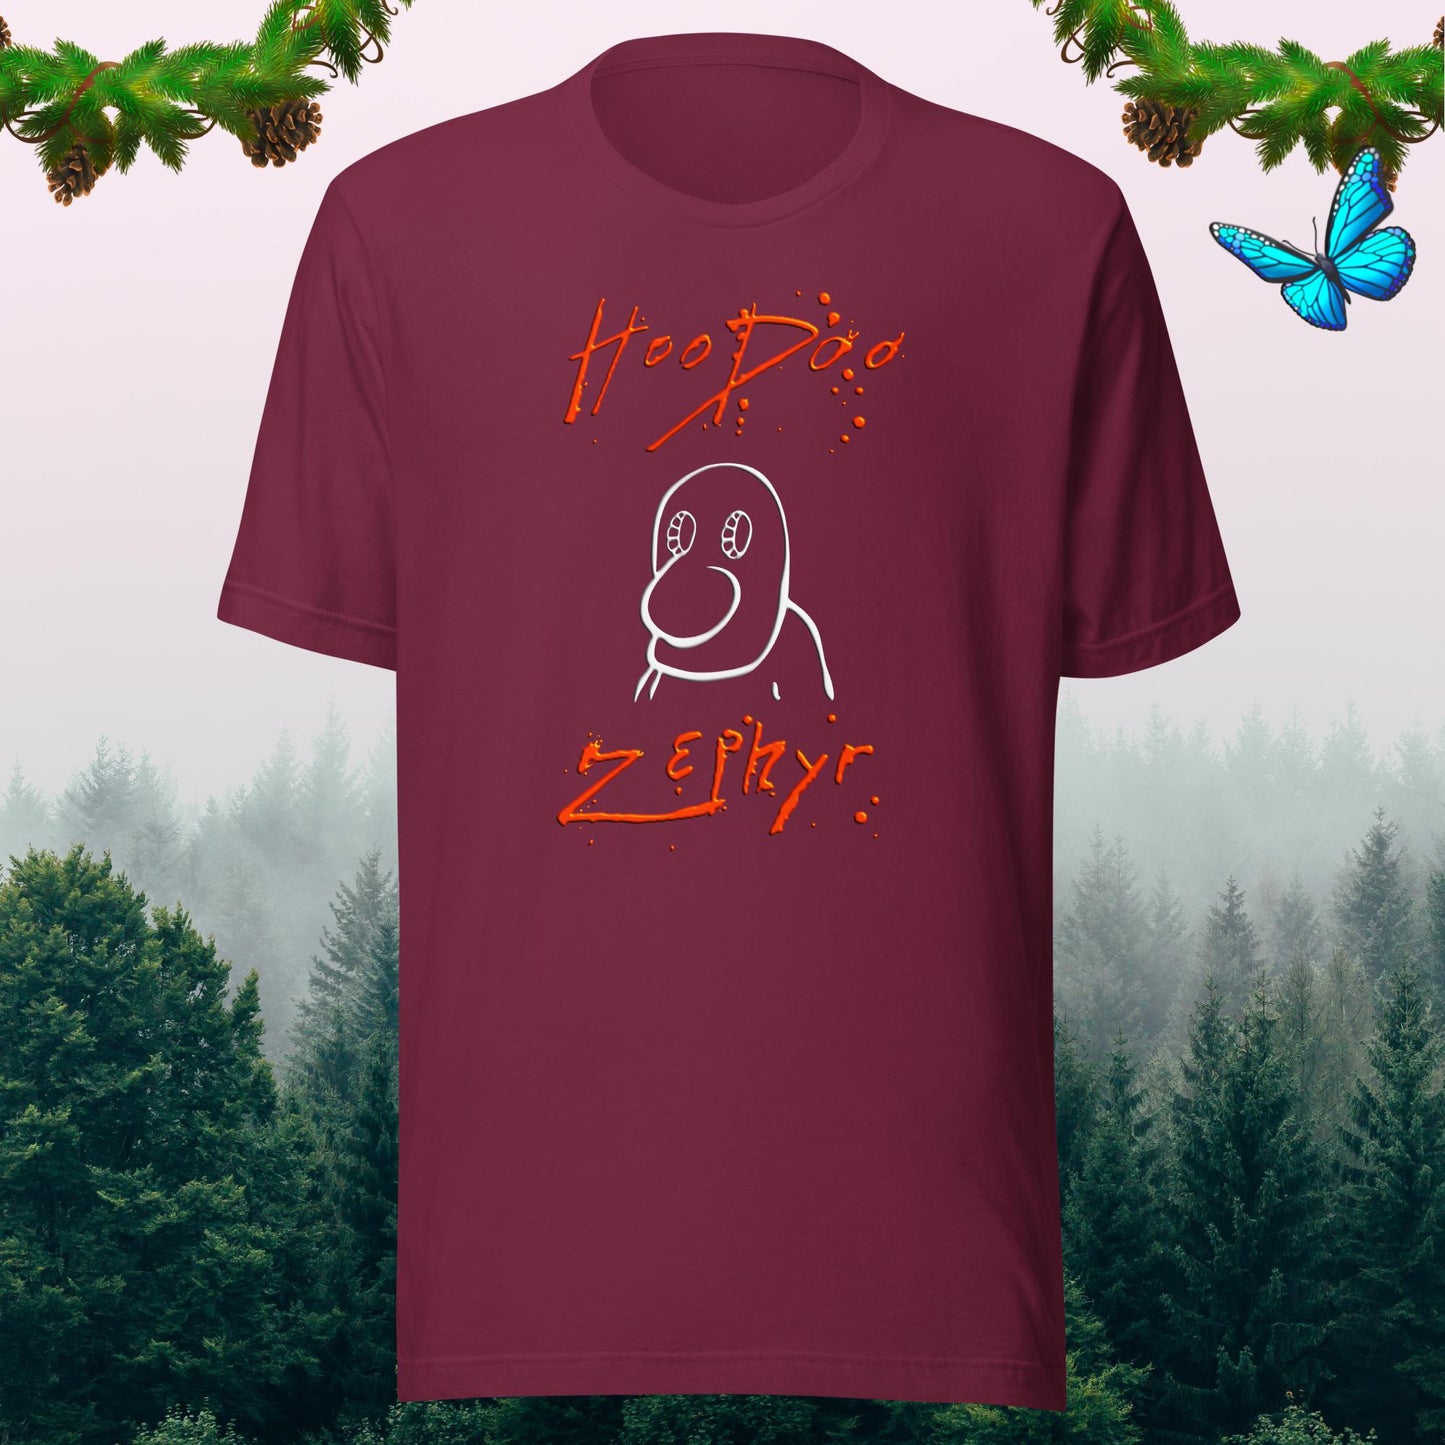 hoodoo zephyr aberdeenshire band t-shirt wine red by stormseye design